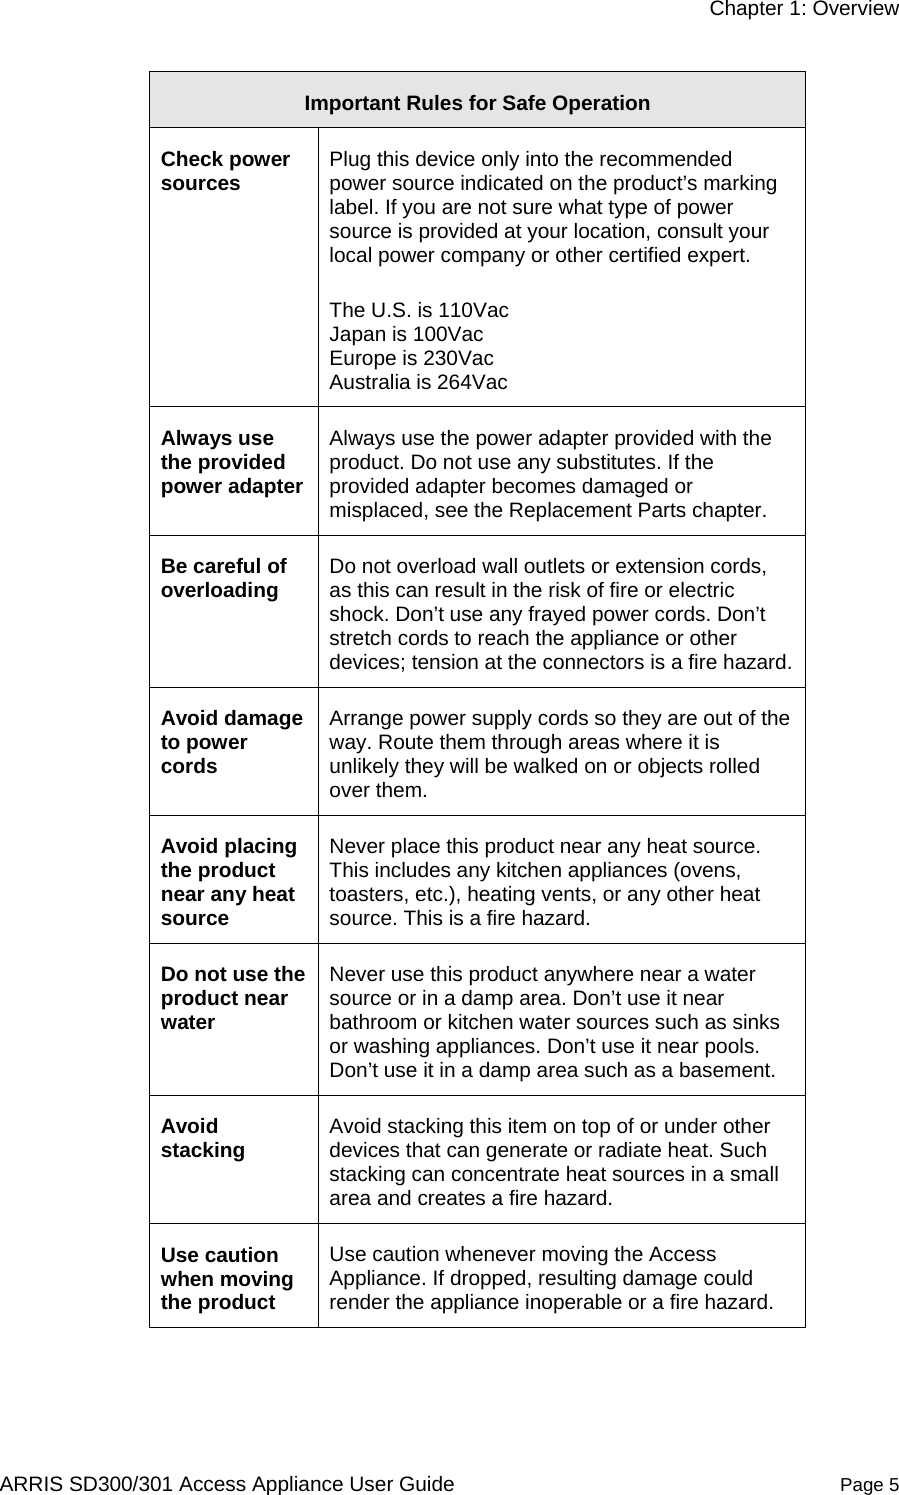     Chapter 1: Overview  ARRIS SD300/301 Access Appliance User Guide  Page 5 Important Rules for Safe Operation Check power sources  Plug this device only into the recommended power source indicated on the product’s marking label. If you are not sure what type of power source is provided at your location, consult your local power company or other certified expert. The U.S. is 110Vac Japan is 100Vac Europe is 230Vac Australia is 264Vac Always use the provided power adapter Always use the power adapter provided with the product. Do not use any substitutes. If the provided adapter becomes damaged or misplaced, see the Replacement Parts chapter. Be careful of overloading  Do not overload wall outlets or extension cords, as this can result in the risk of fire or electric shock. Don’t use any frayed power cords. Don’t stretch cords to reach the appliance or other devices; tension at the connectors is a fire hazard. Avoid damage to power cords Arrange power supply cords so they are out of the way. Route them through areas where it is unlikely they will be walked on or objects rolled over them. Avoid placing the product near any heat source Never place this product near any heat source. This includes any kitchen appliances (ovens, toasters, etc.), heating vents, or any other heat source. This is a fire hazard. Do not use the product near water Never use this product anywhere near a water source or in a damp area. Don’t use it near bathroom or kitchen water sources such as sinks or washing appliances. Don’t use it near pools. Don’t use it in a damp area such as a basement. Avoid stacking  Avoid stacking this item on top of or under other devices that can generate or radiate heat. Such stacking can concentrate heat sources in a small area and creates a fire hazard. Use caution when moving the product Use caution whenever moving the Access Appliance. If dropped, resulting damage could render the appliance inoperable or a fire hazard. 